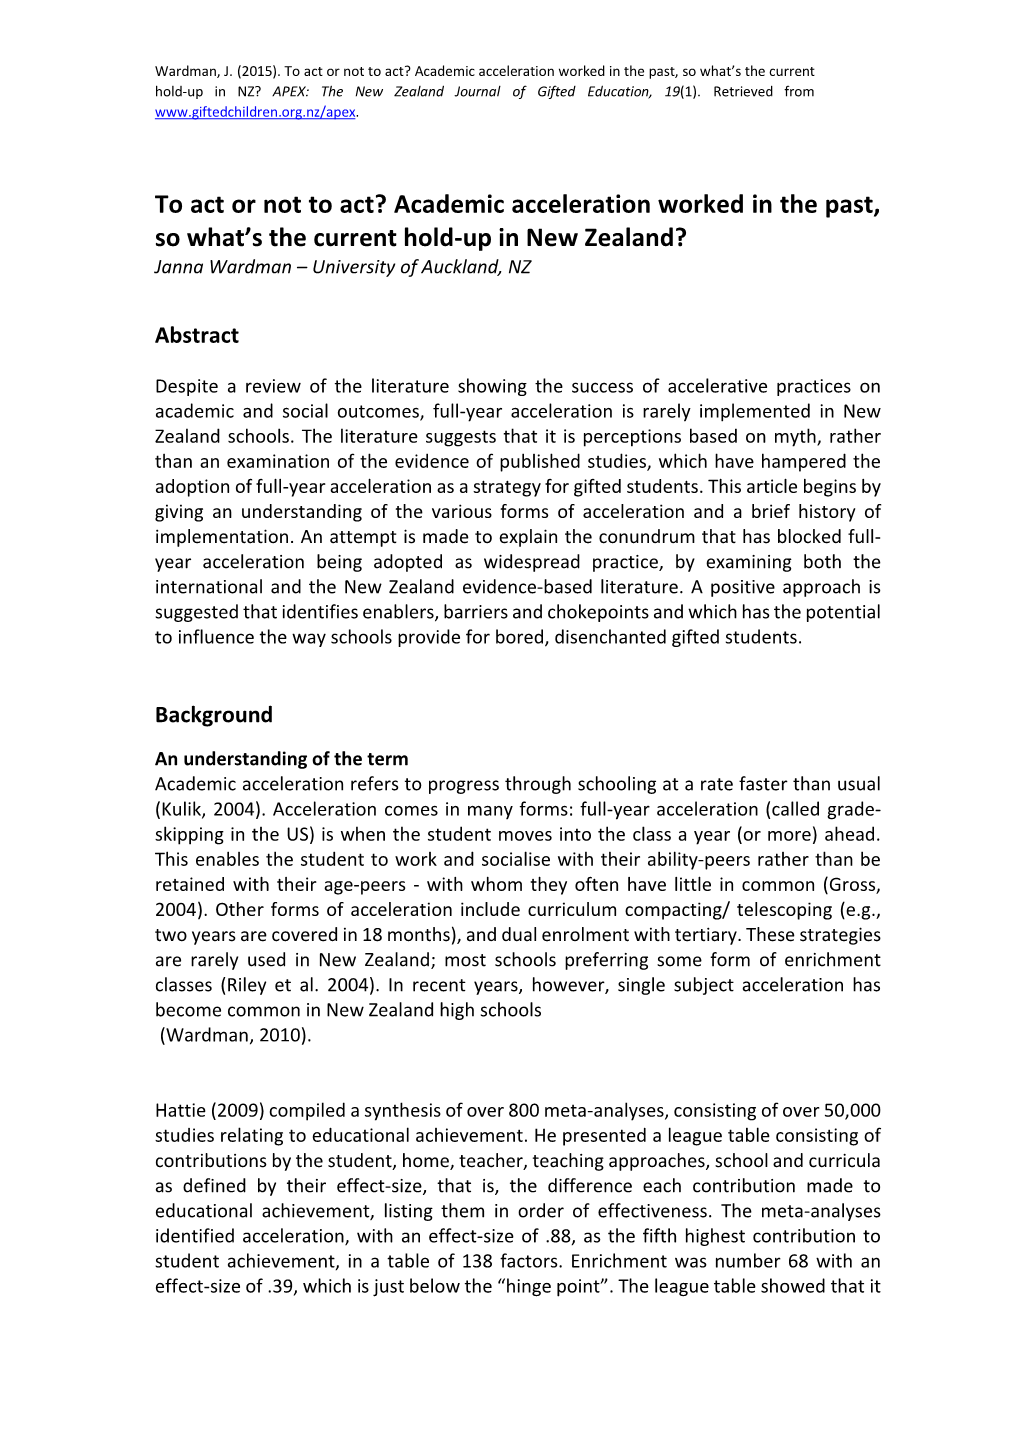 To Act Or Not to Act? Academic Acceleration Worked in the Past, So What’S the Current Hold-Up in NZ? APEX: the New Zealand Journal of Gifted Education, 19(1)